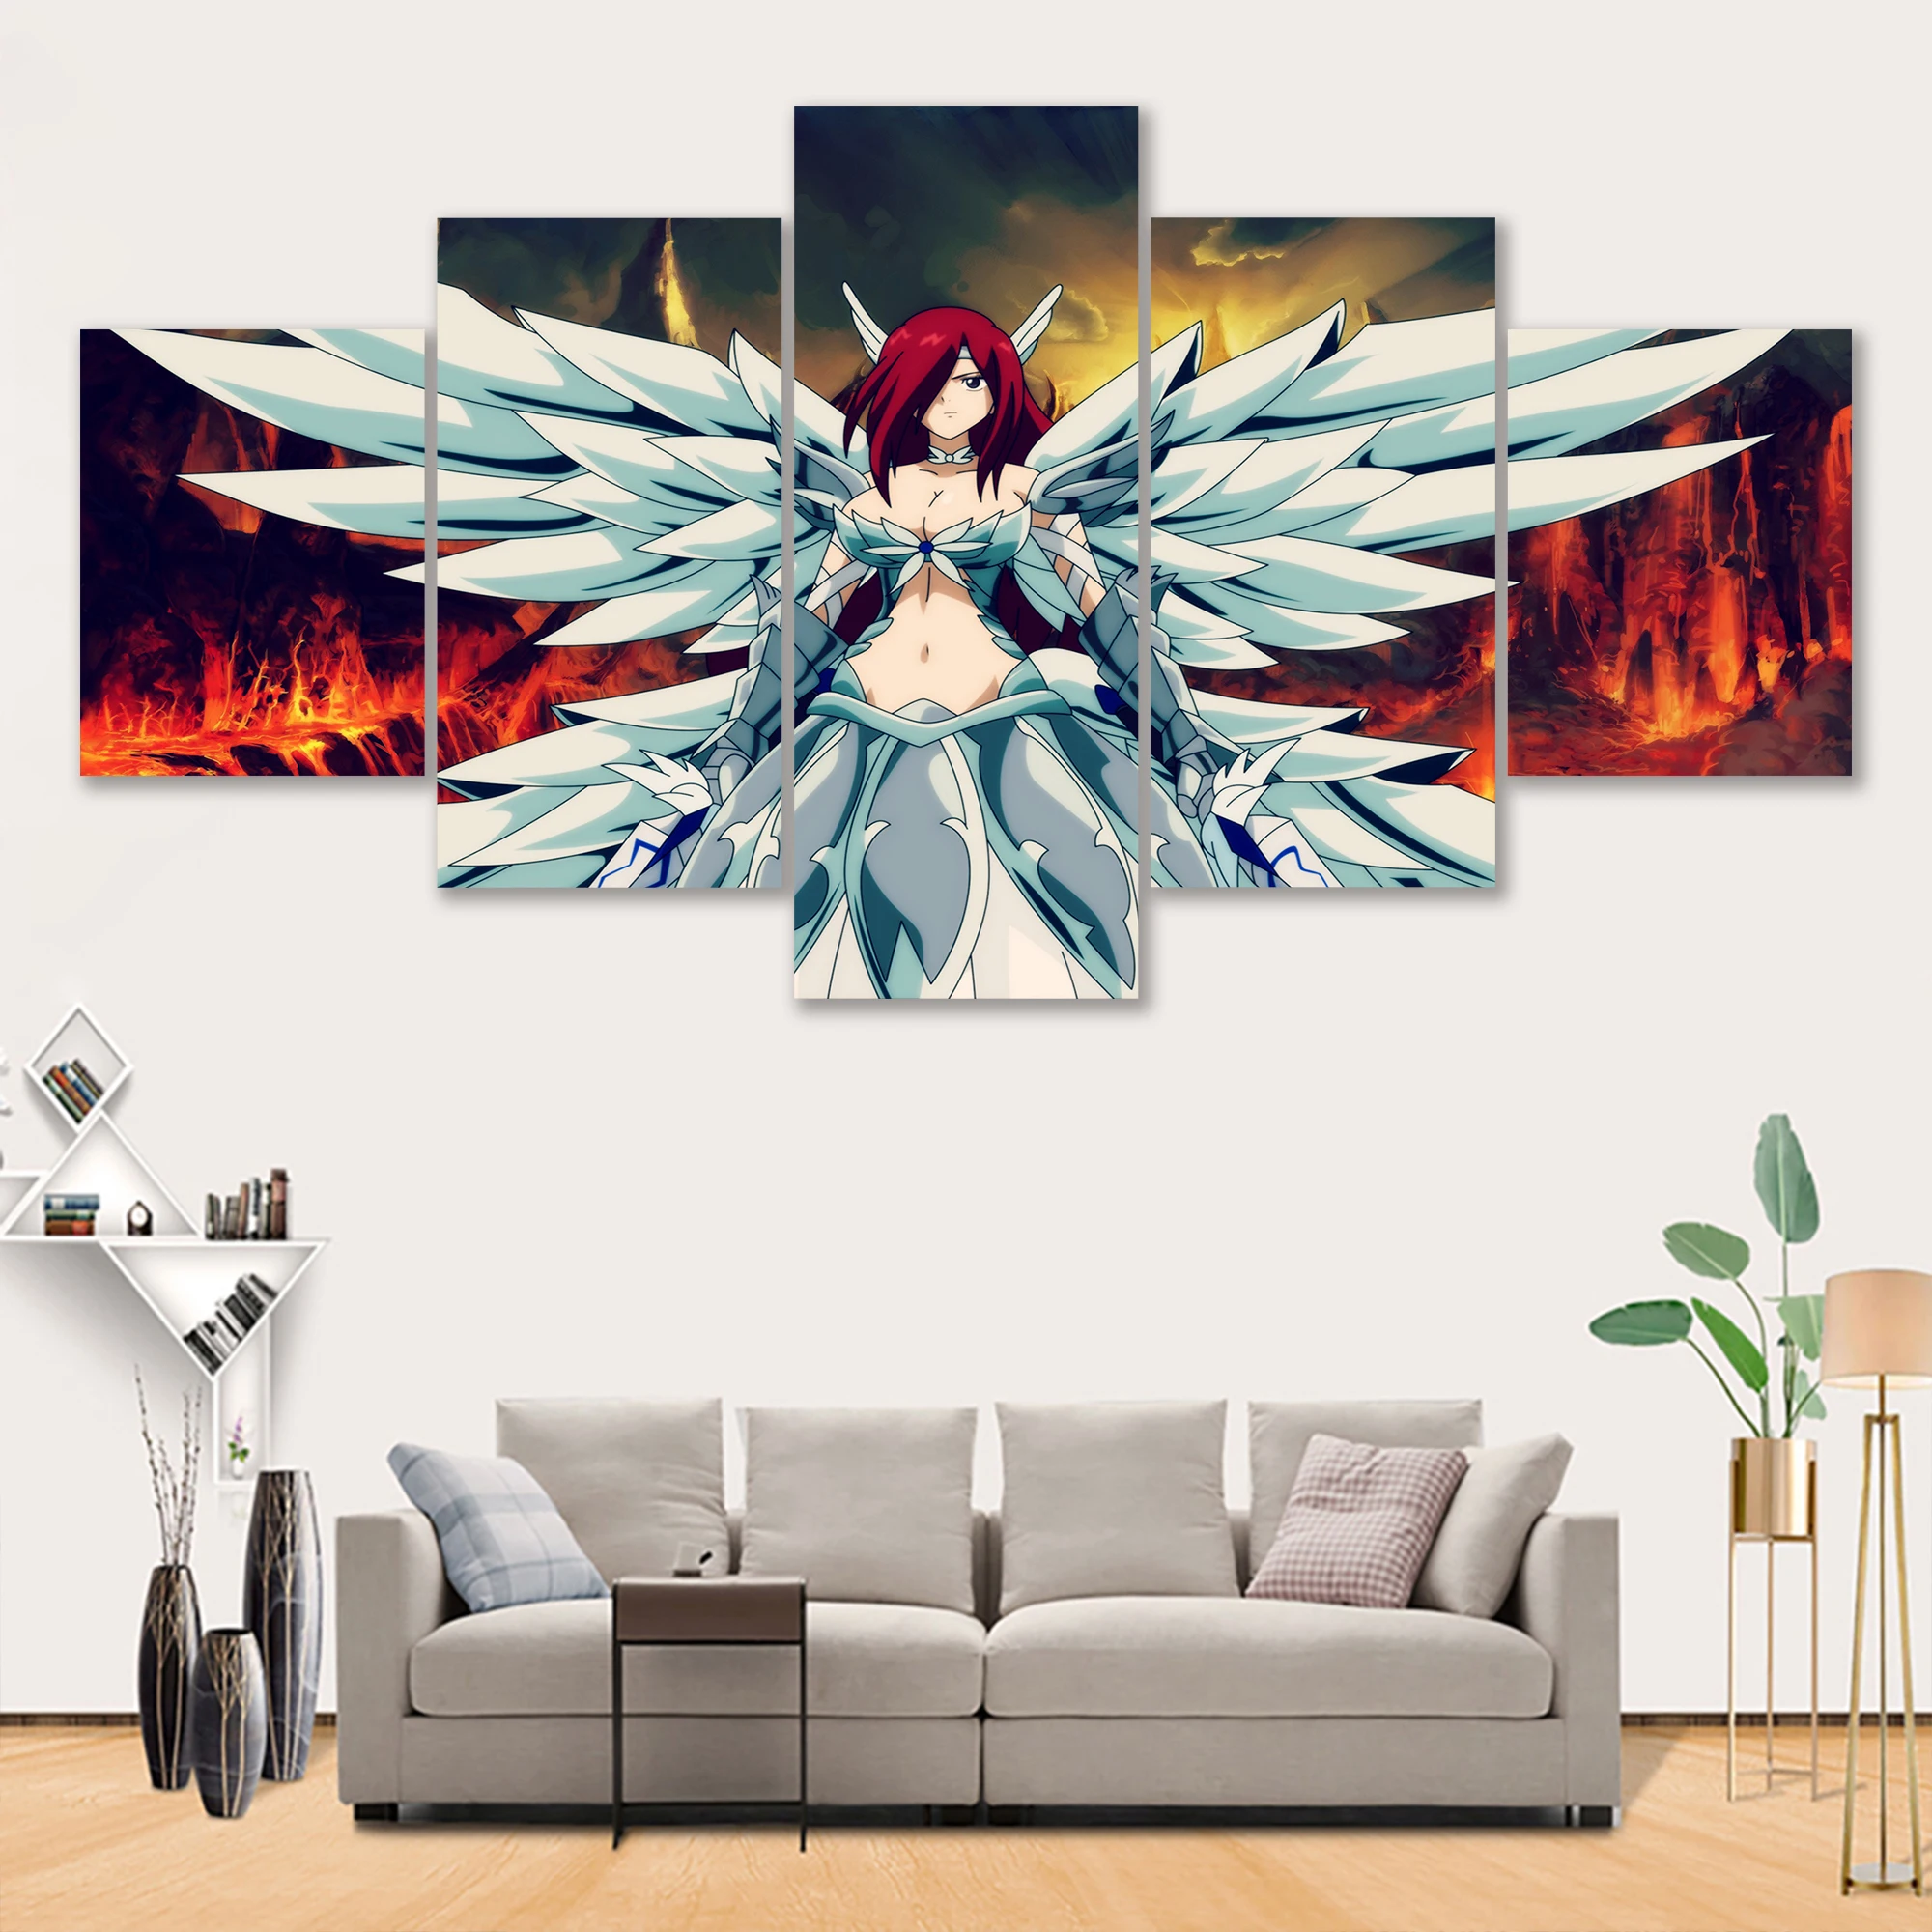 

HD Print Anime Role Poster 5 Pieces Fairy Tail Pictures Wall Art Canvas Painting Modern Living Room Home Decor Modular Artwork